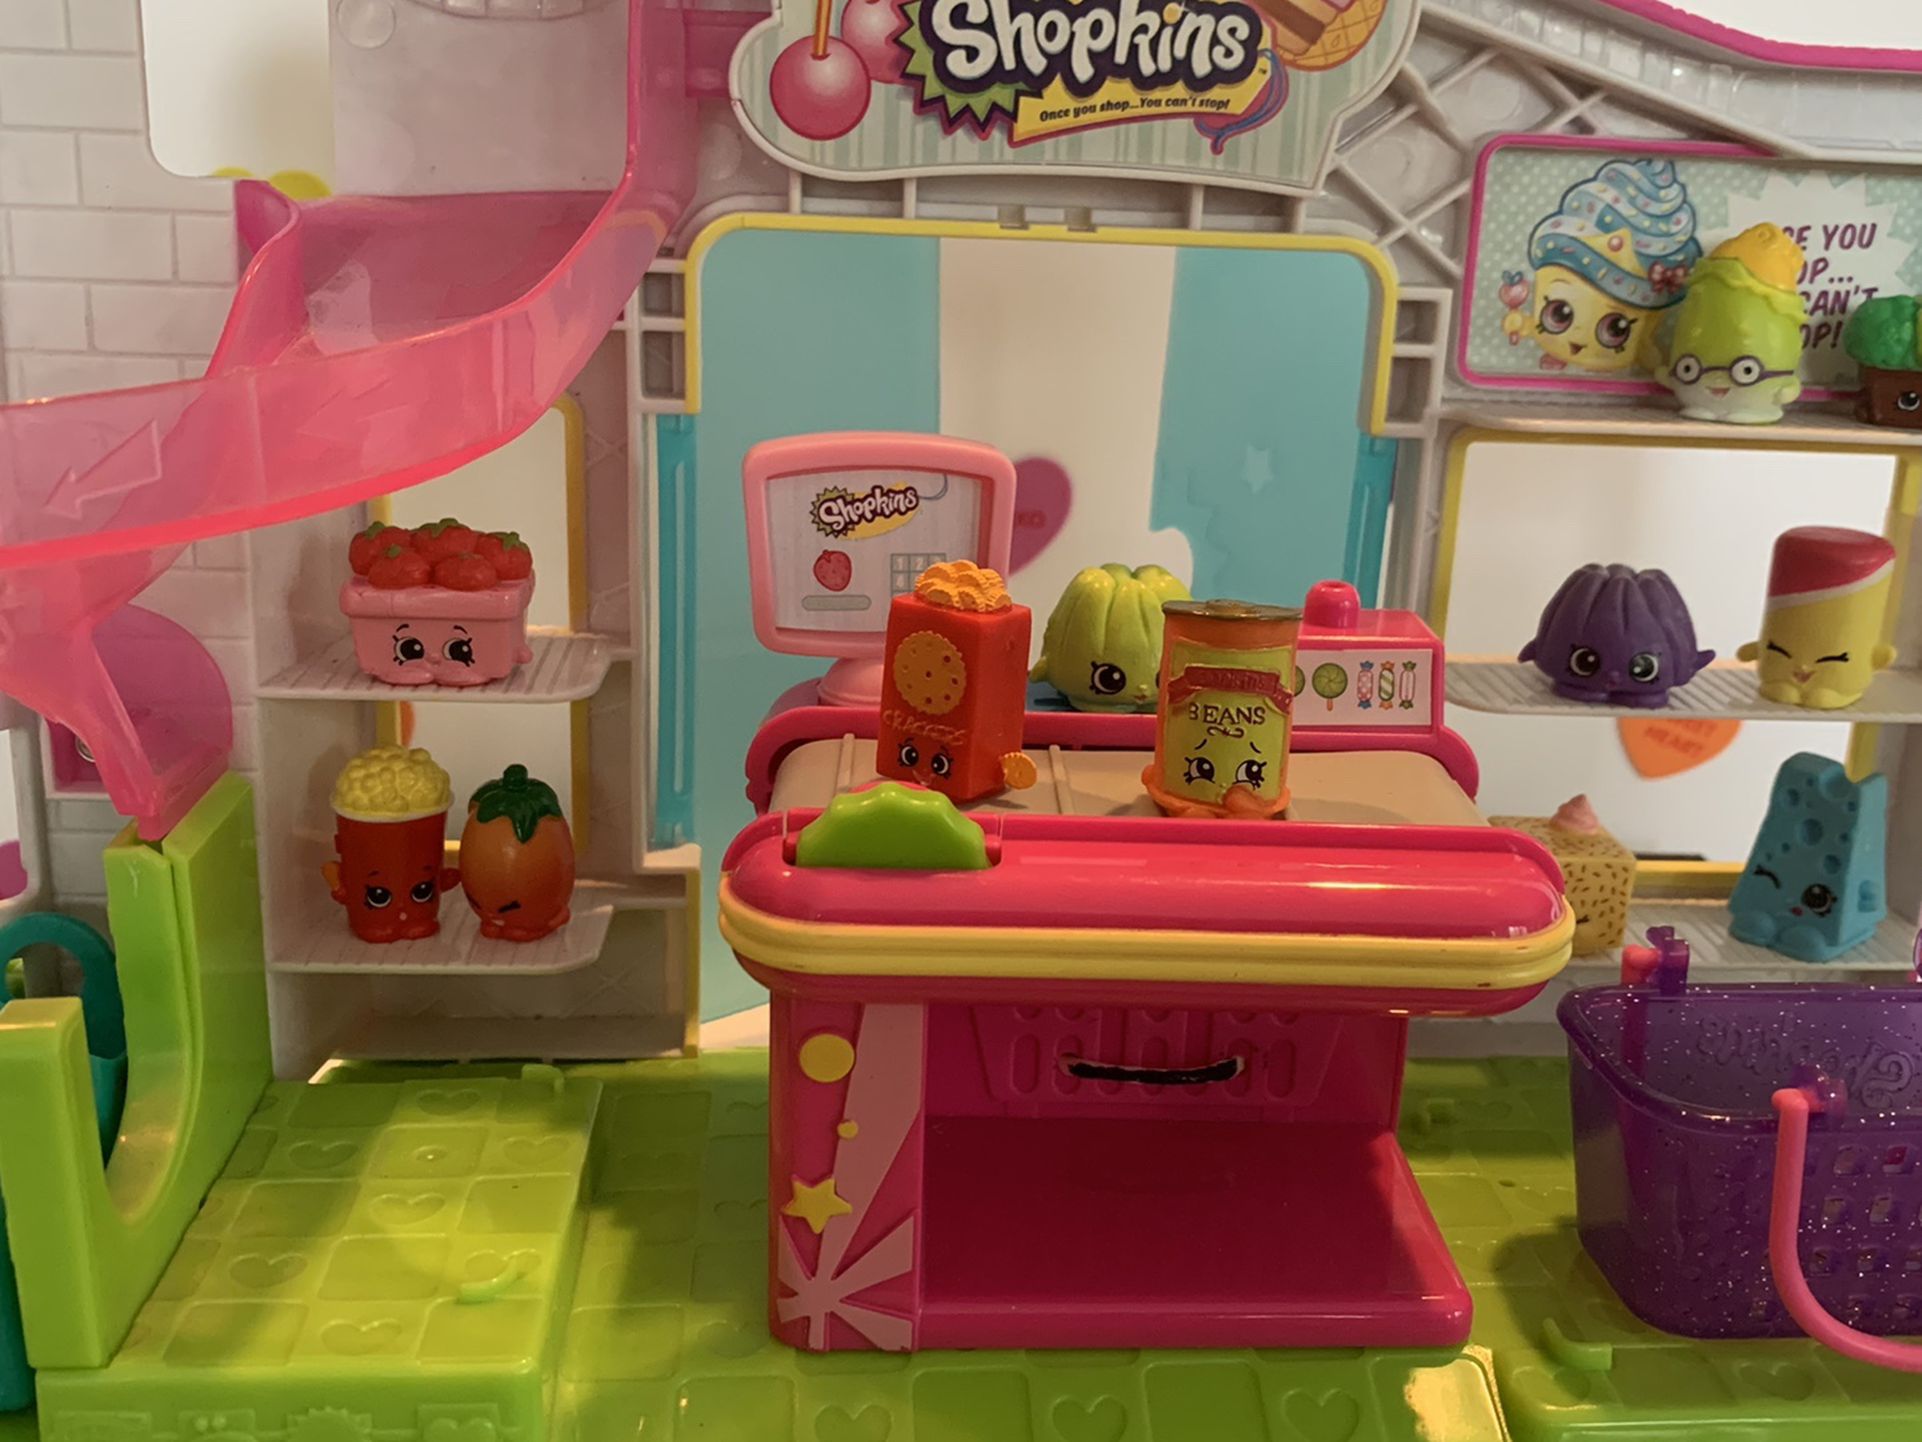 SHOPKINS GROCERY STORE WITH CUTE REGISTER (removable) 1 LARGE BASKET, 2 SMALLER BASKETS & 12 SHOPKINS! DOORS OPEN AND CLOSE